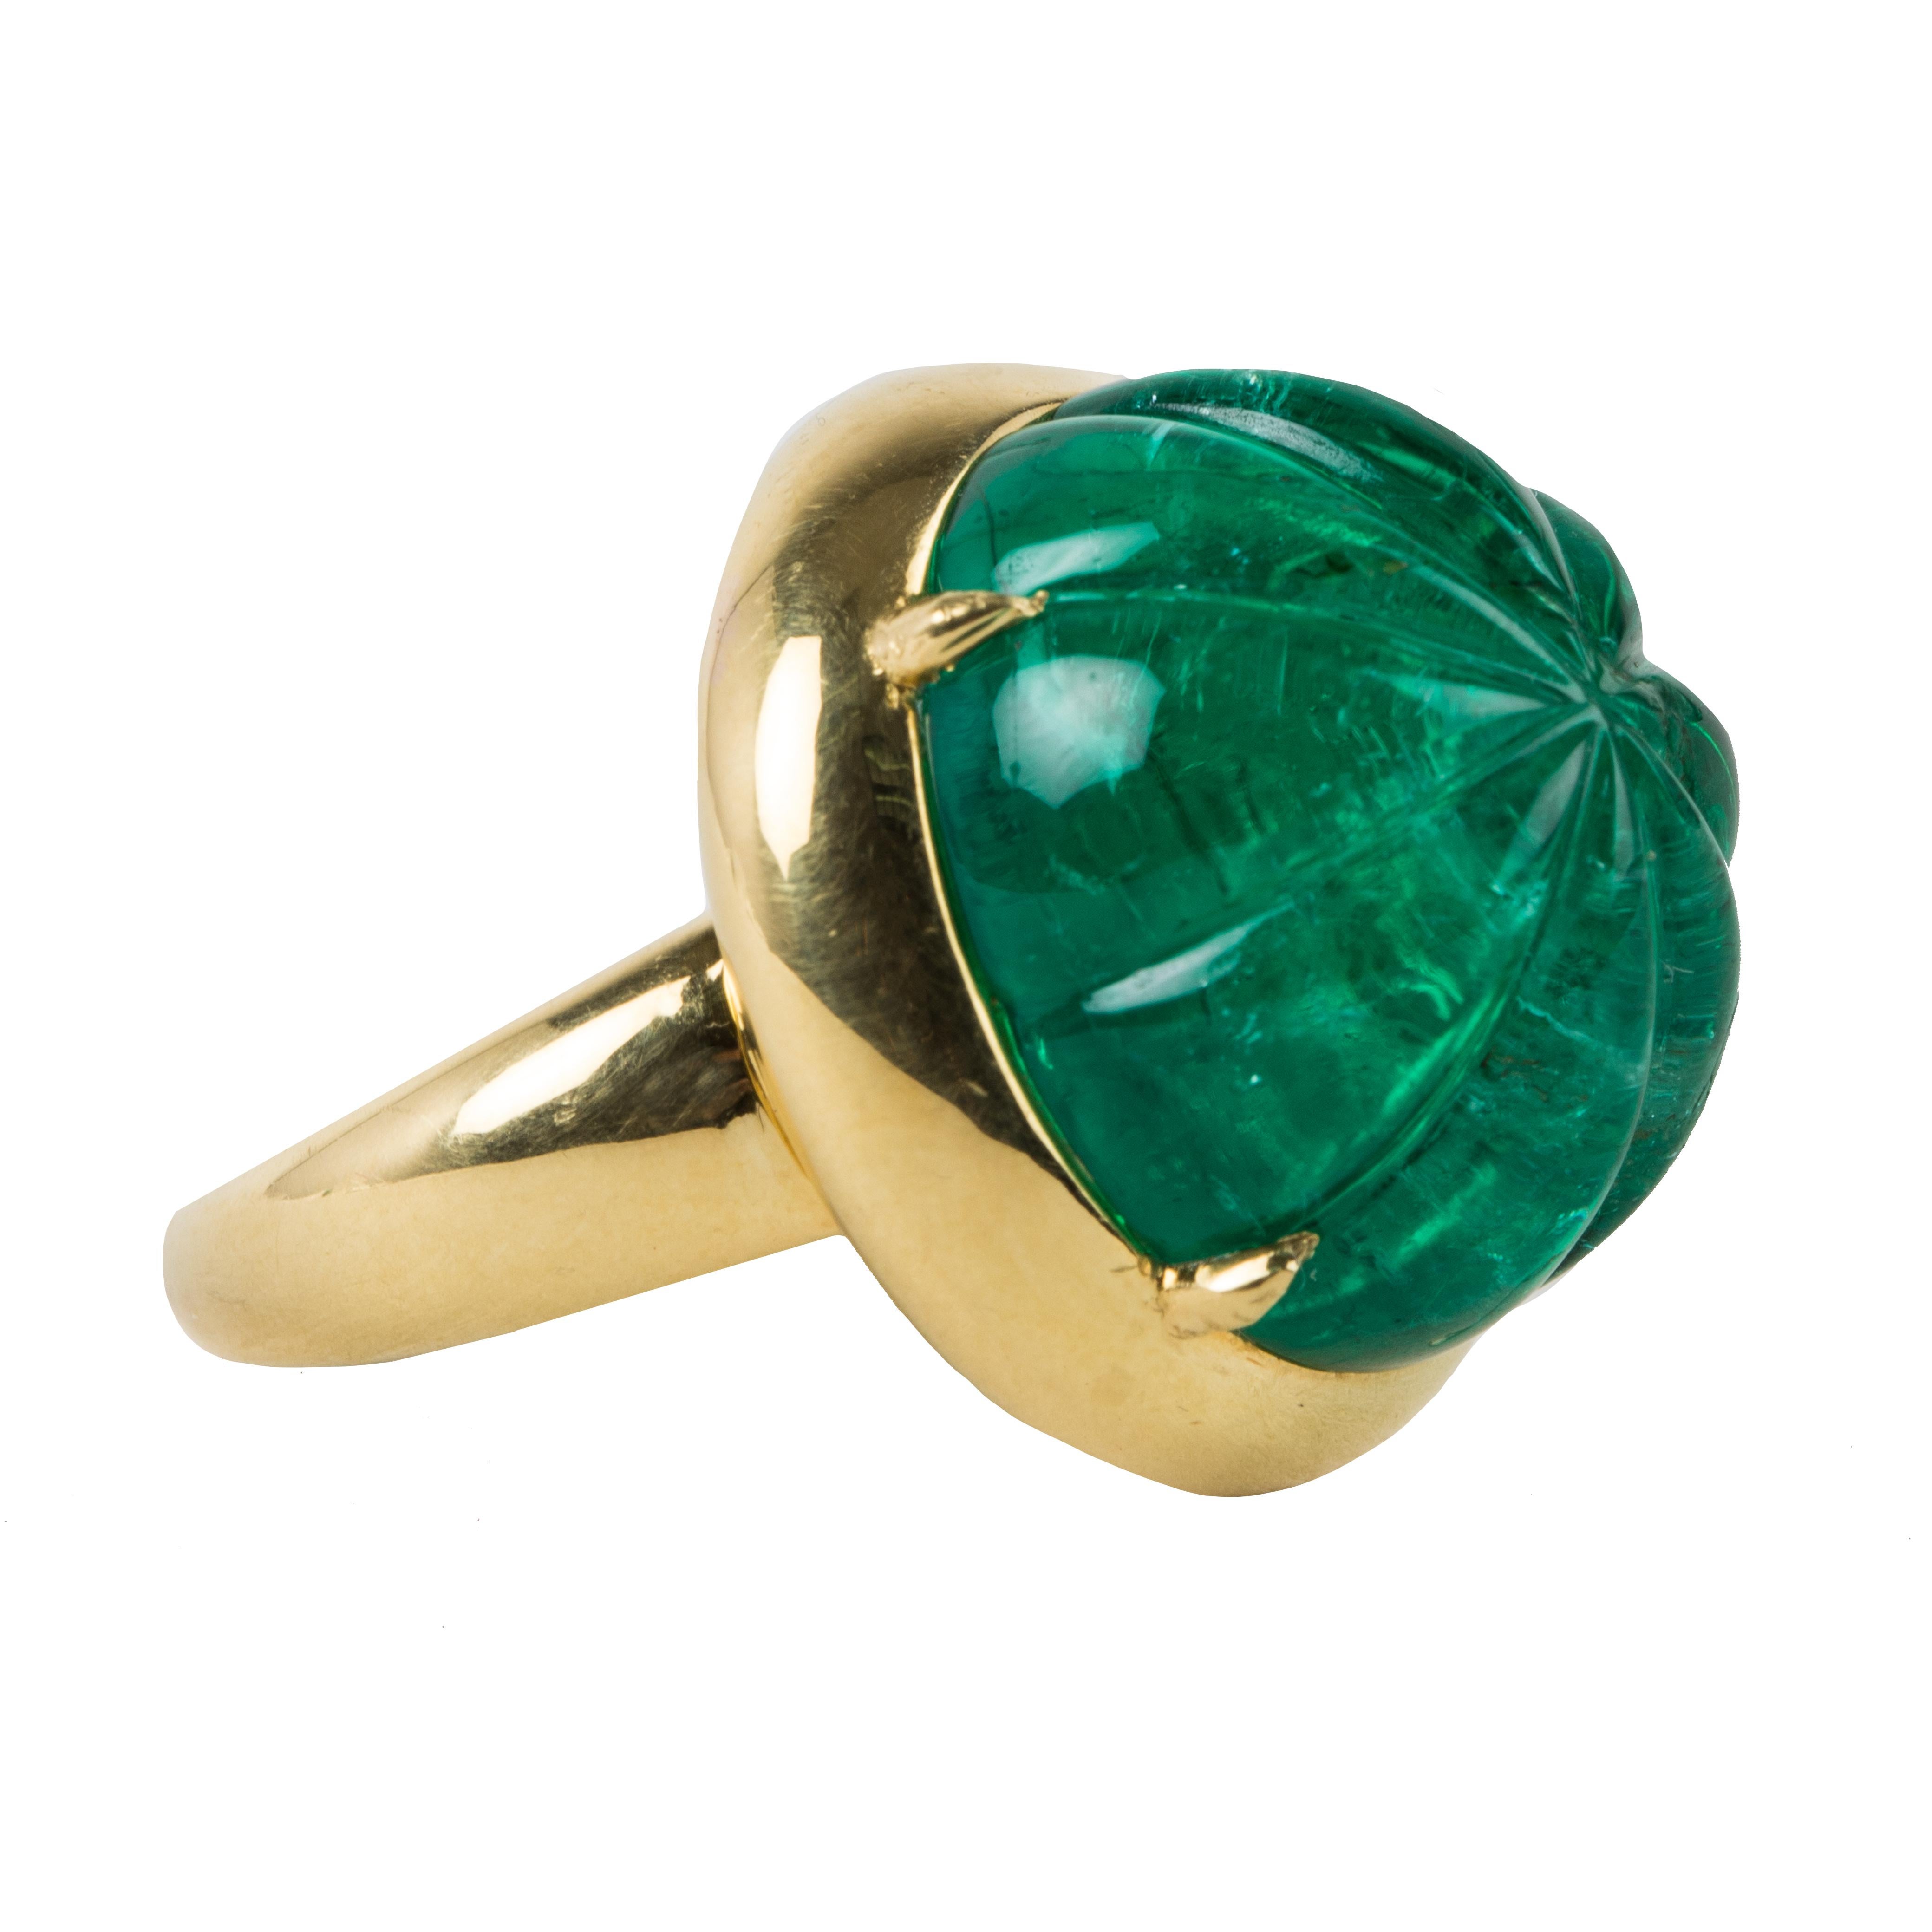 This is a 19 carat Colombian emerald ring, using an old mine emerald.
The stone has been carved and set with 4 prongs in platinum.